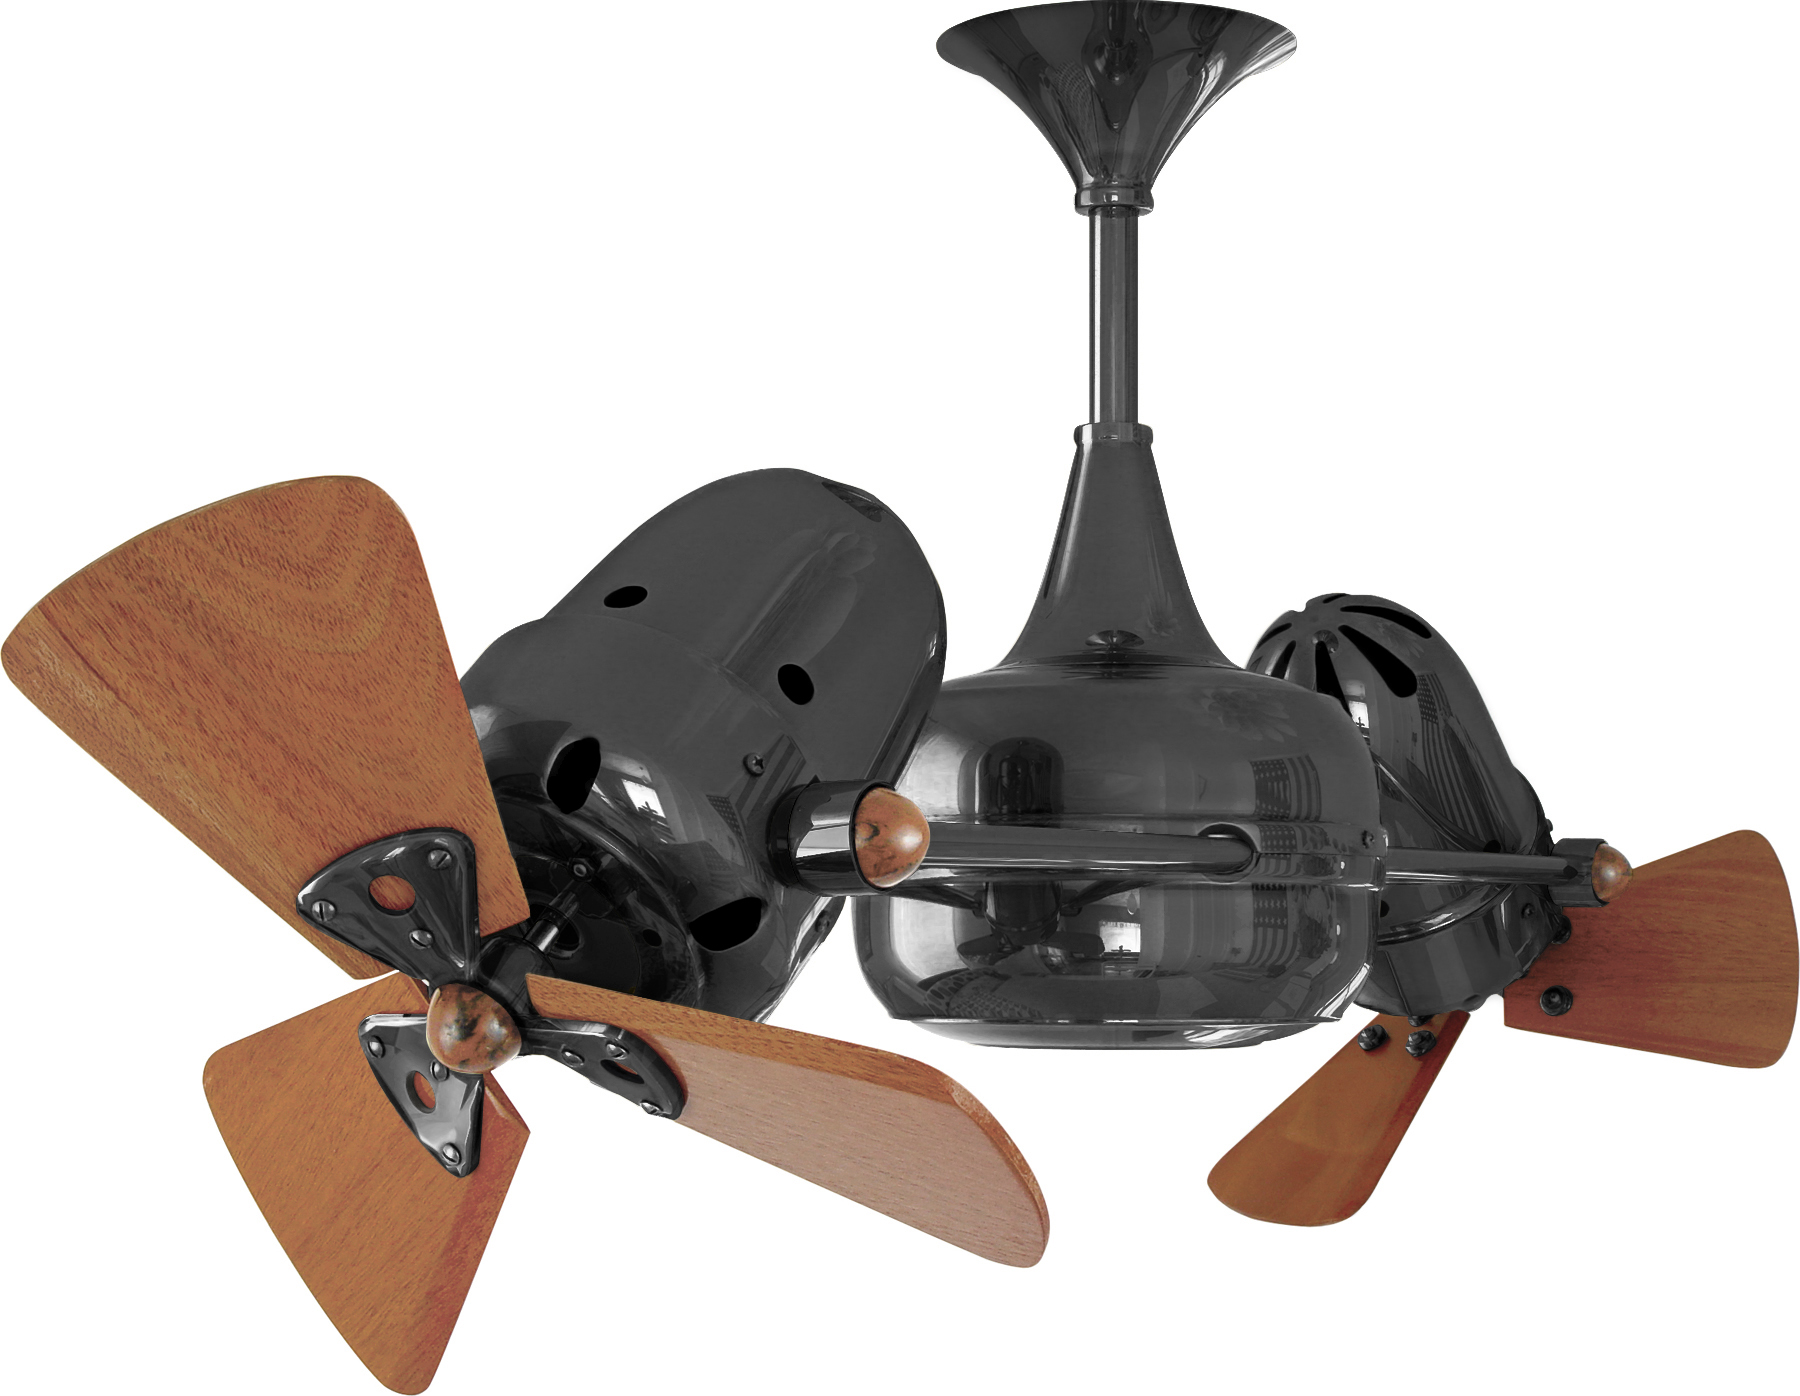 Duplo Dinamico rotational dual head ceiling fan in black nickel finish with solid mahogany wood blades made by Matthews Fan Company.